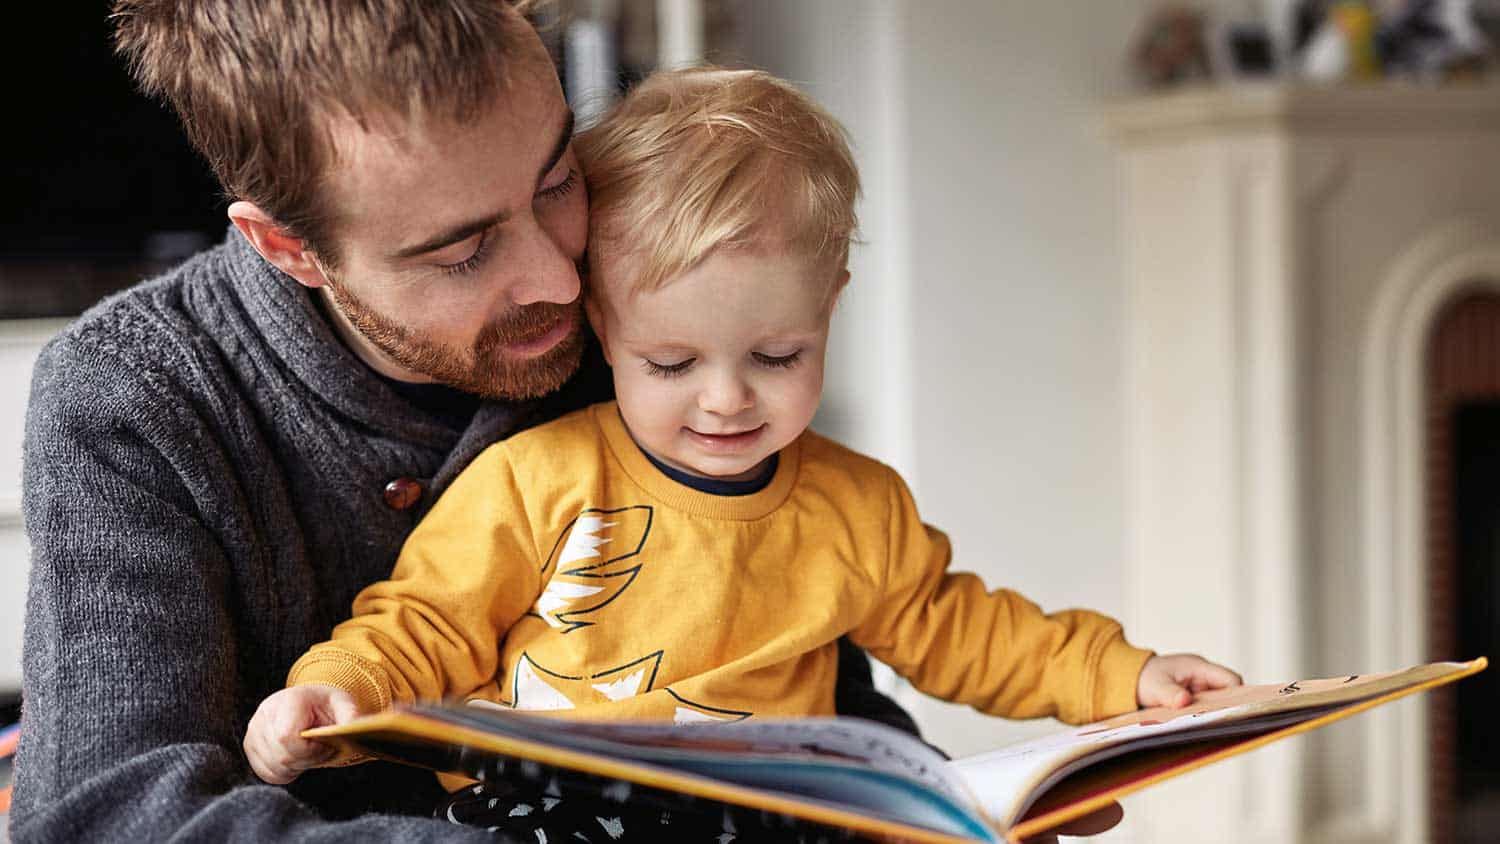 Child wearing a yellow jumper reading a story on his father's lap